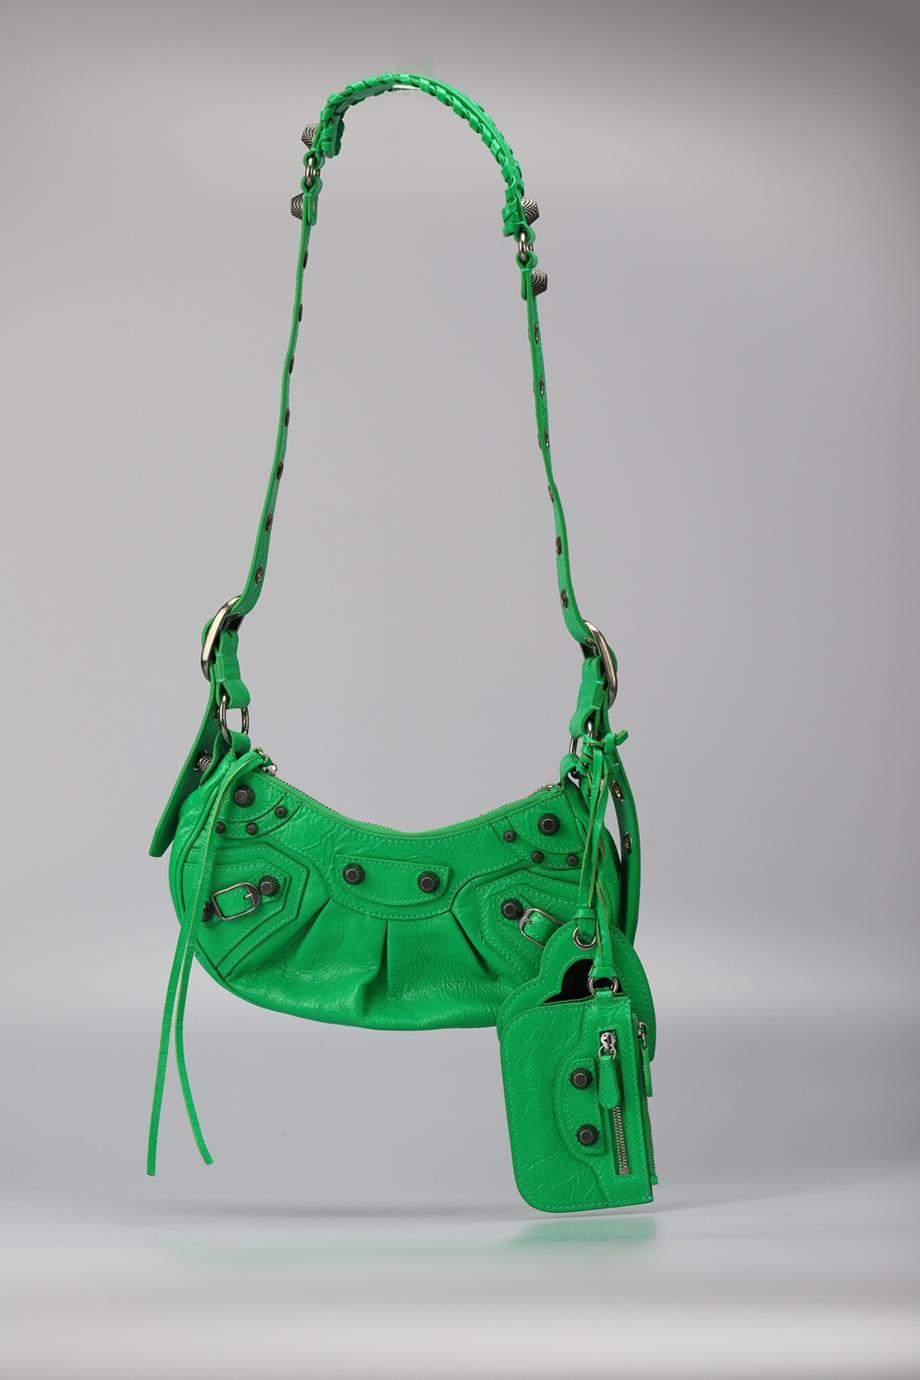 Balenciaga Le Cagole Xs Studded Crinkled Leather Shoulder Bag. Green. Zip fastening - Top. Does not come with - dustbag or box. Height: 5 In. Width: 9.5 In. Depth: 2.1 In. Strap drop: 15.3 In. Condition: Used. Very good condition - Worn once. No